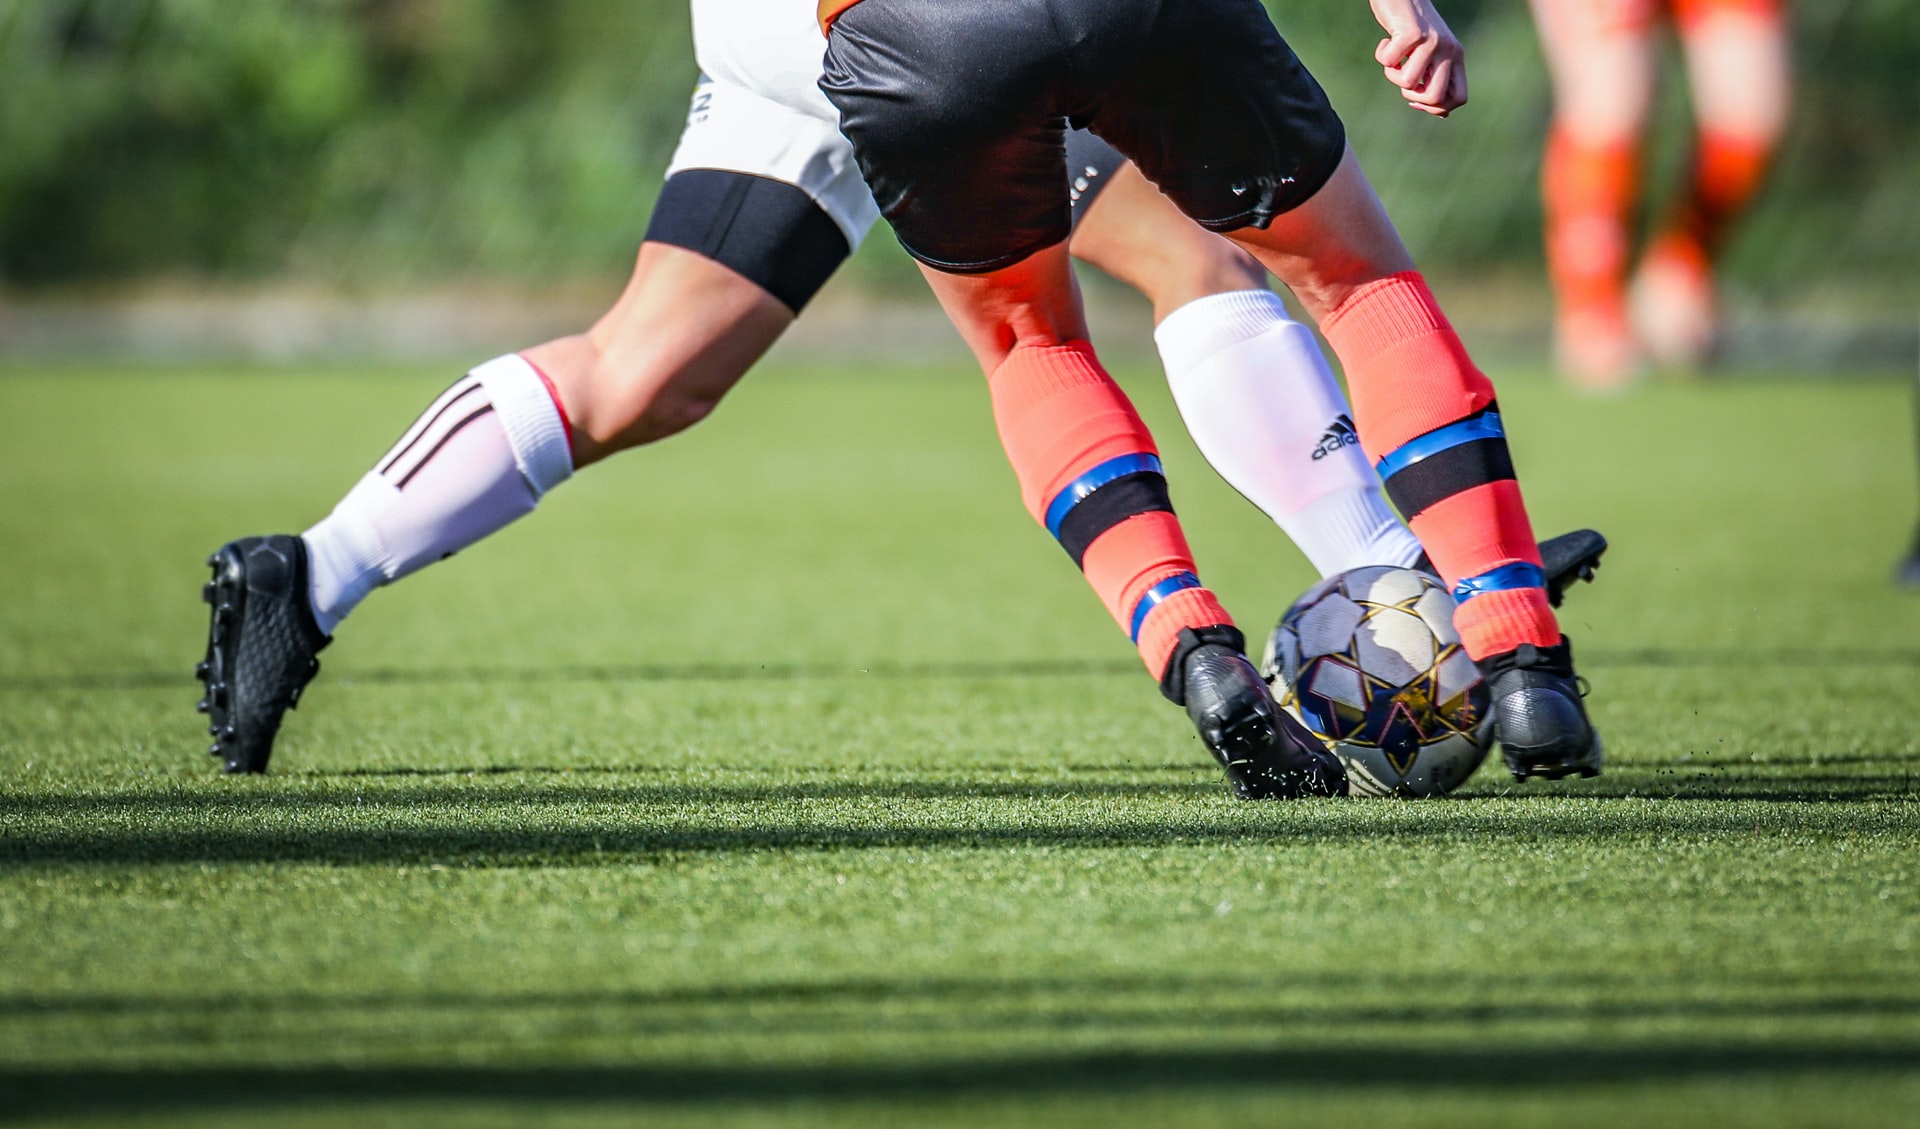 What are the benefits of artificial grass for sports facilities?